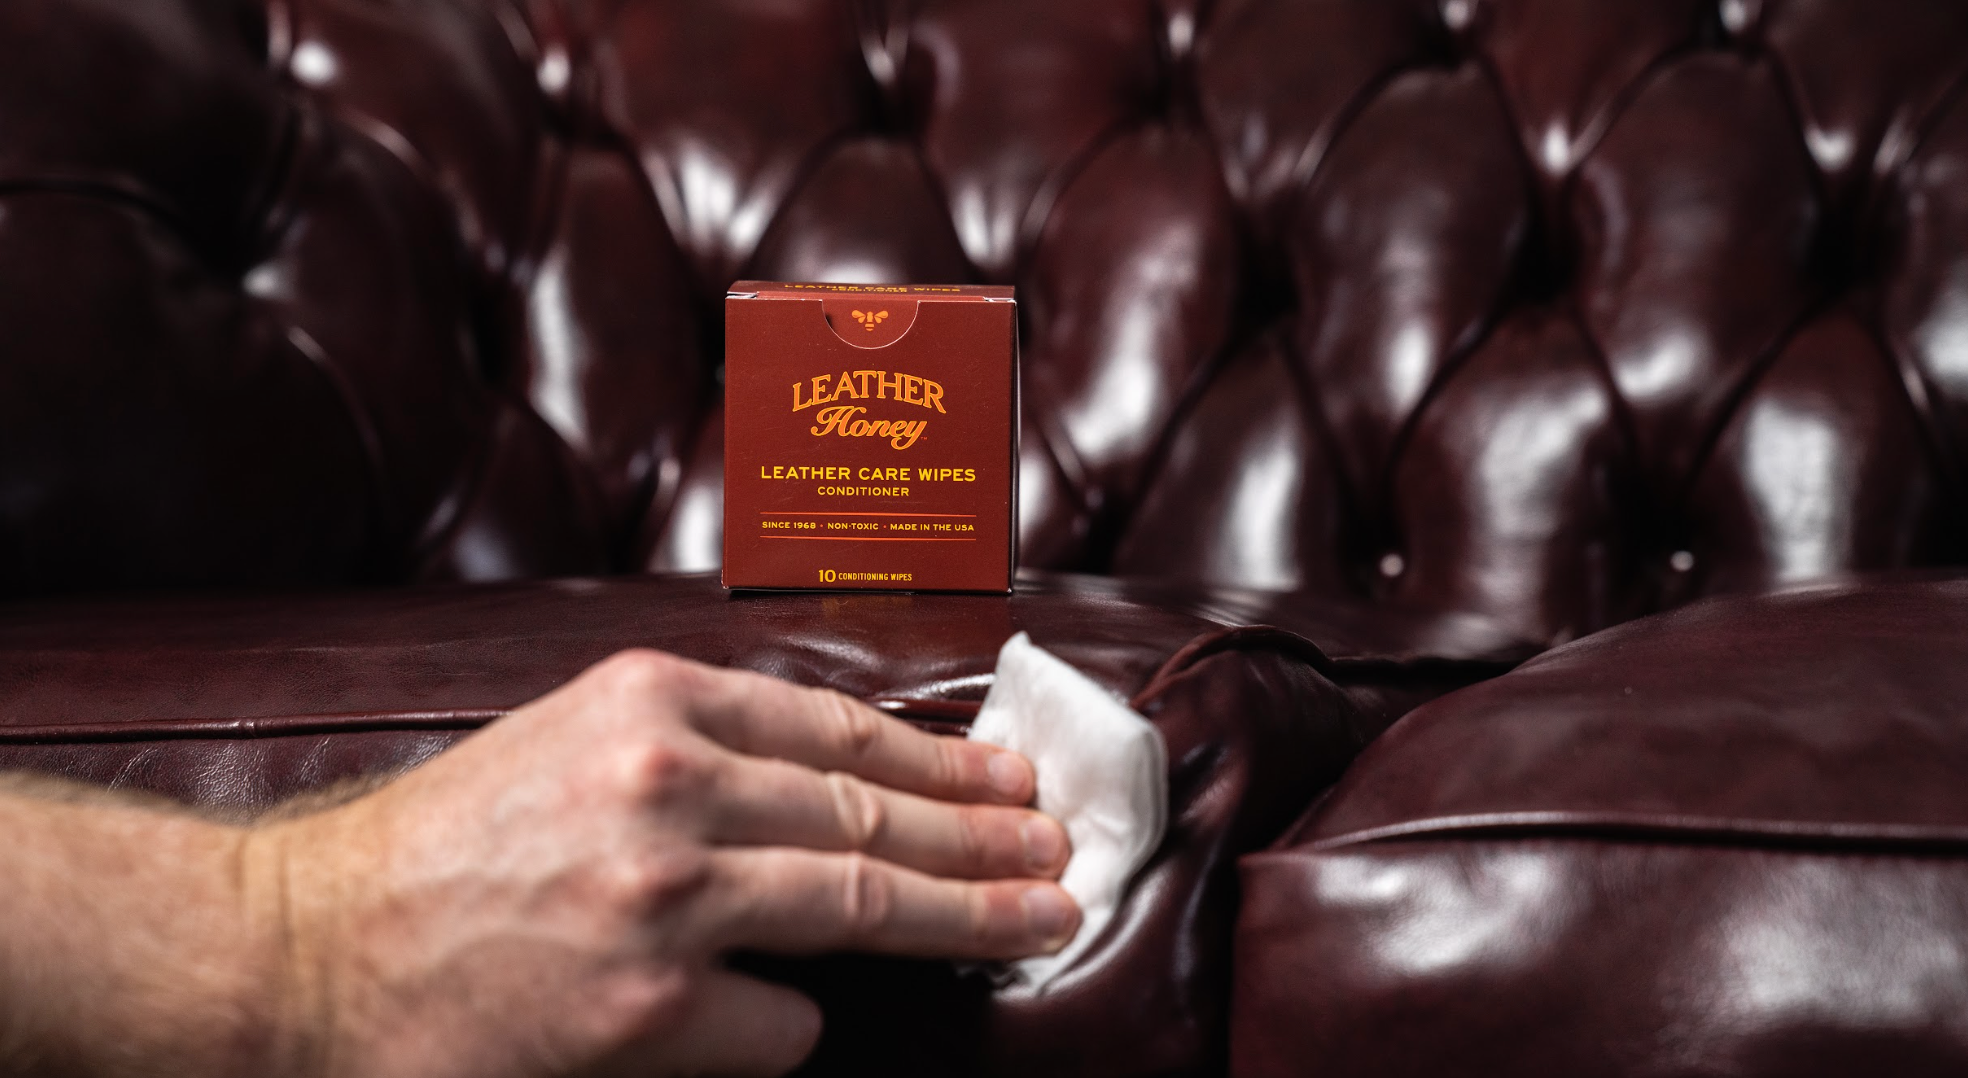 How to Use Leather Honey Leather Care Wipes